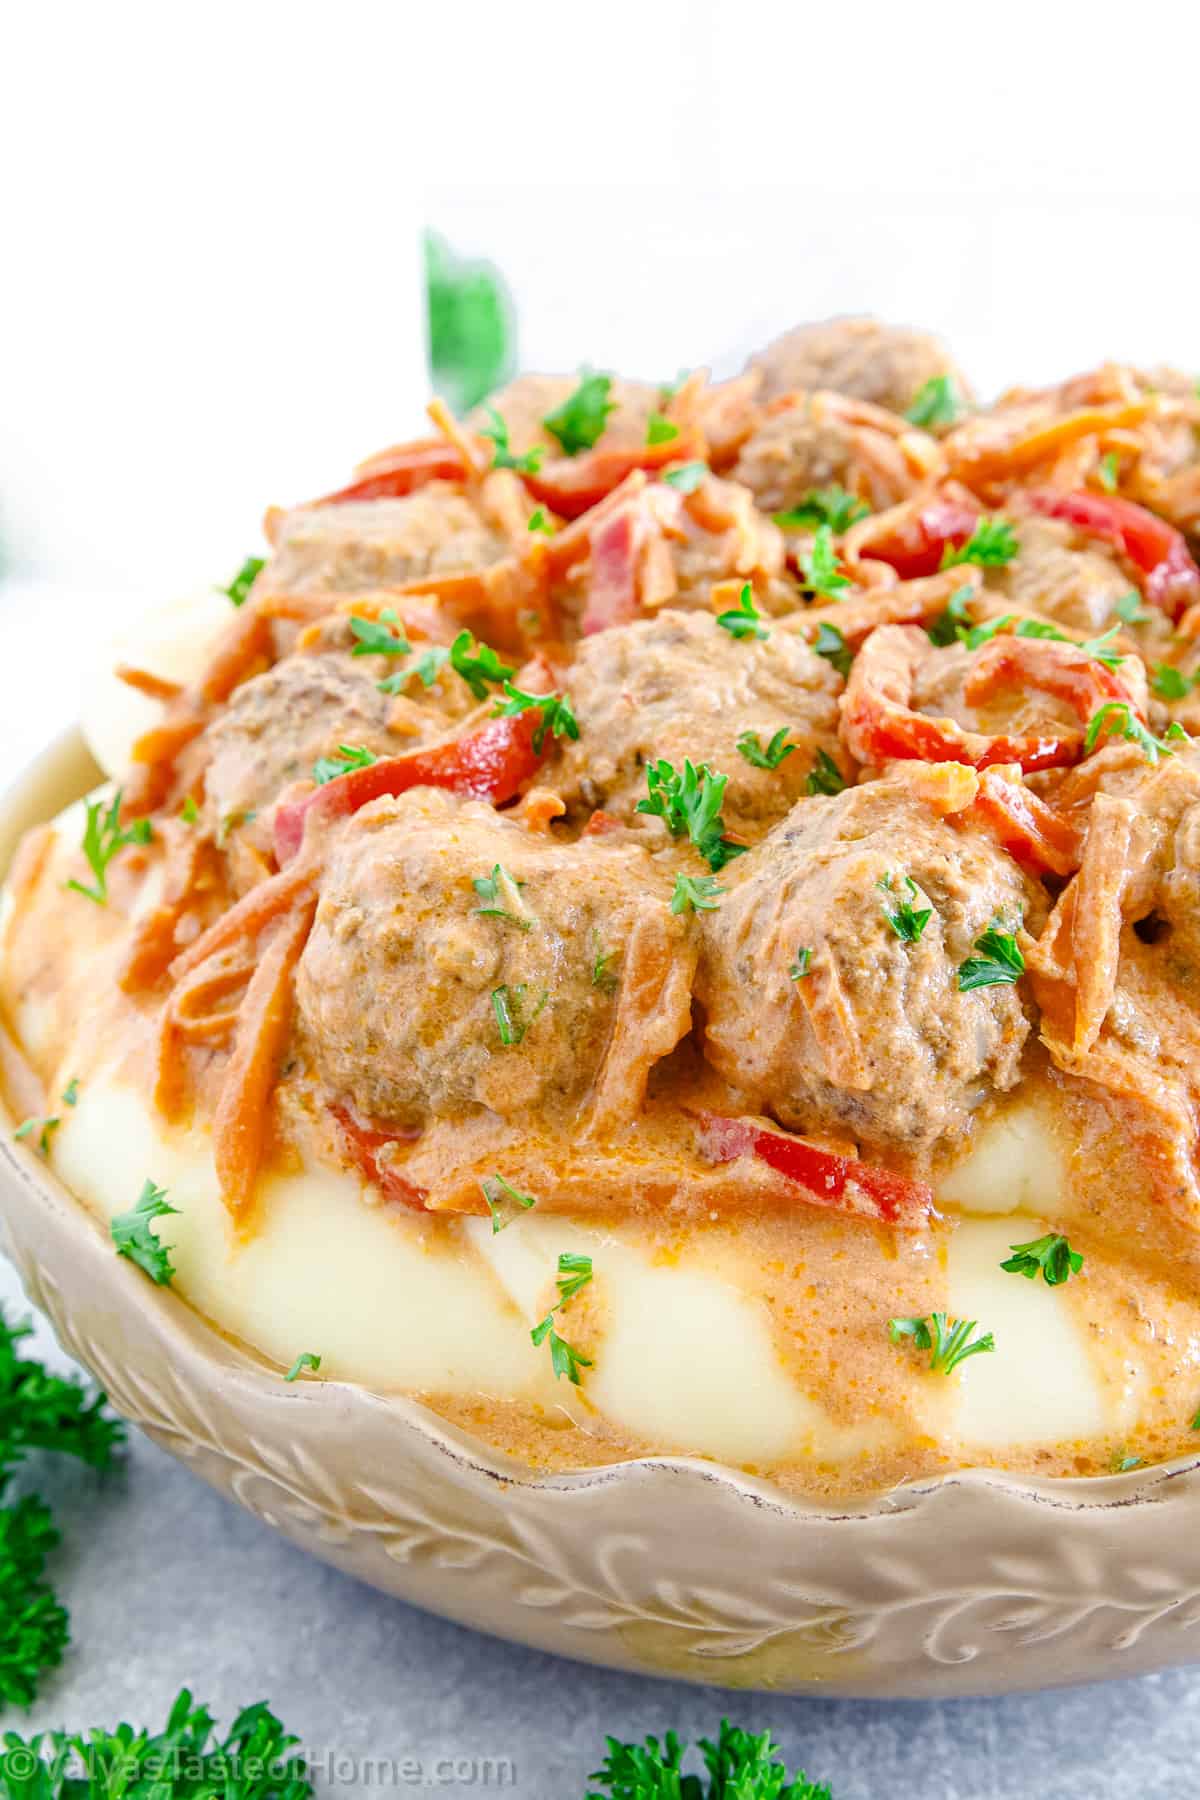 Gluten-free meatballs are a tasty and nutritious alternative to traditional meatballs.